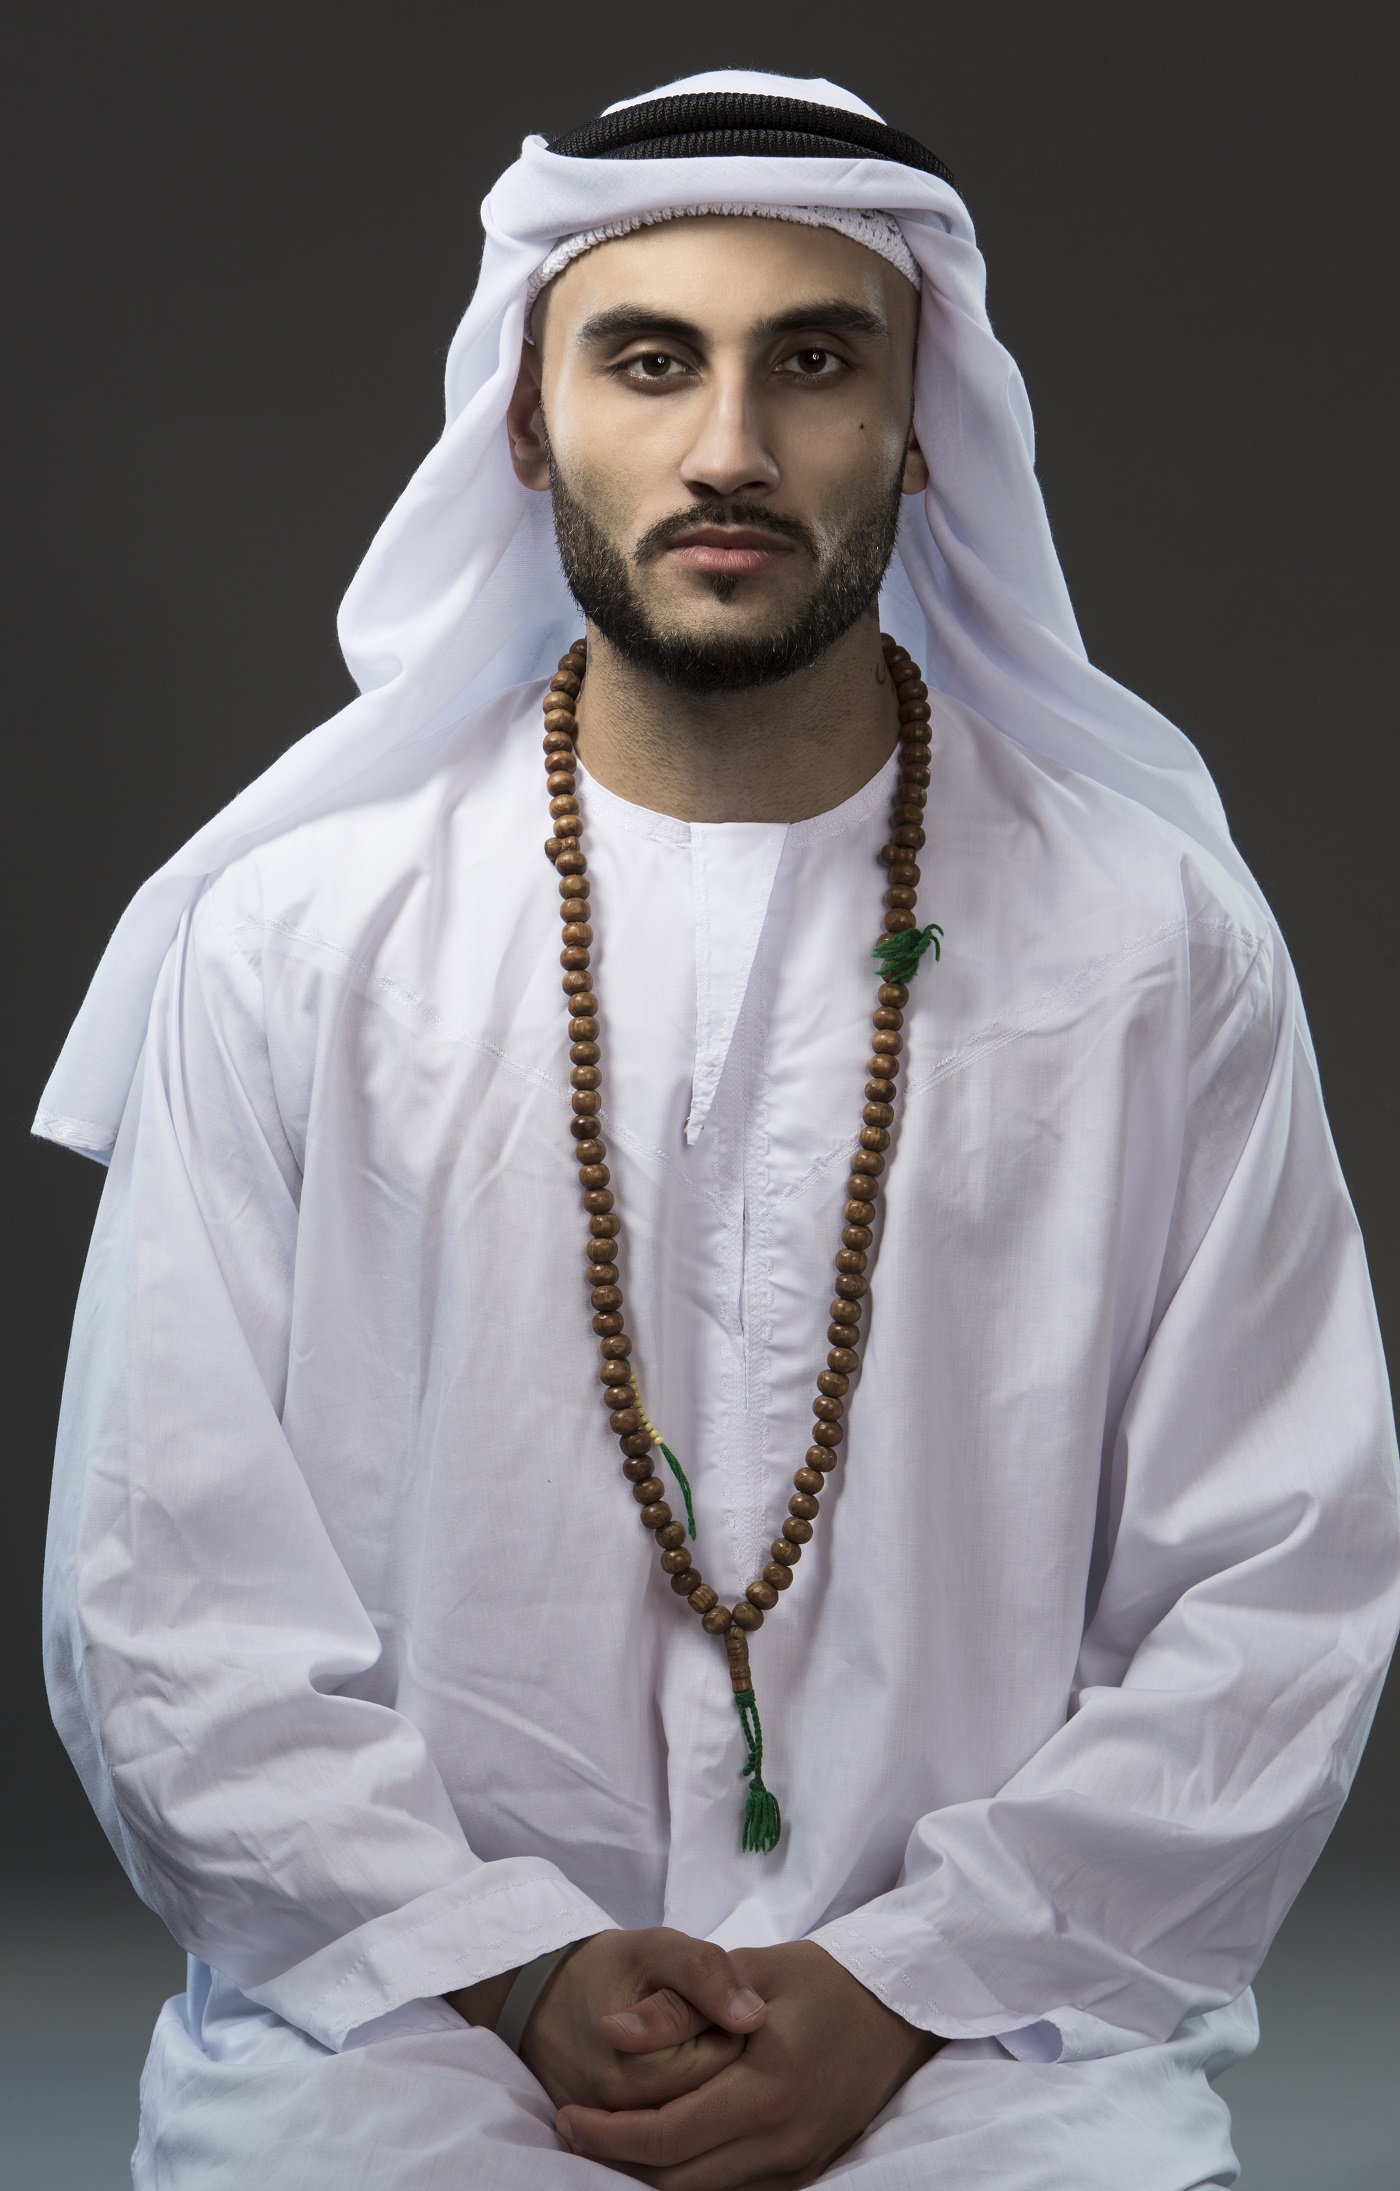 A young man in traditional dress.